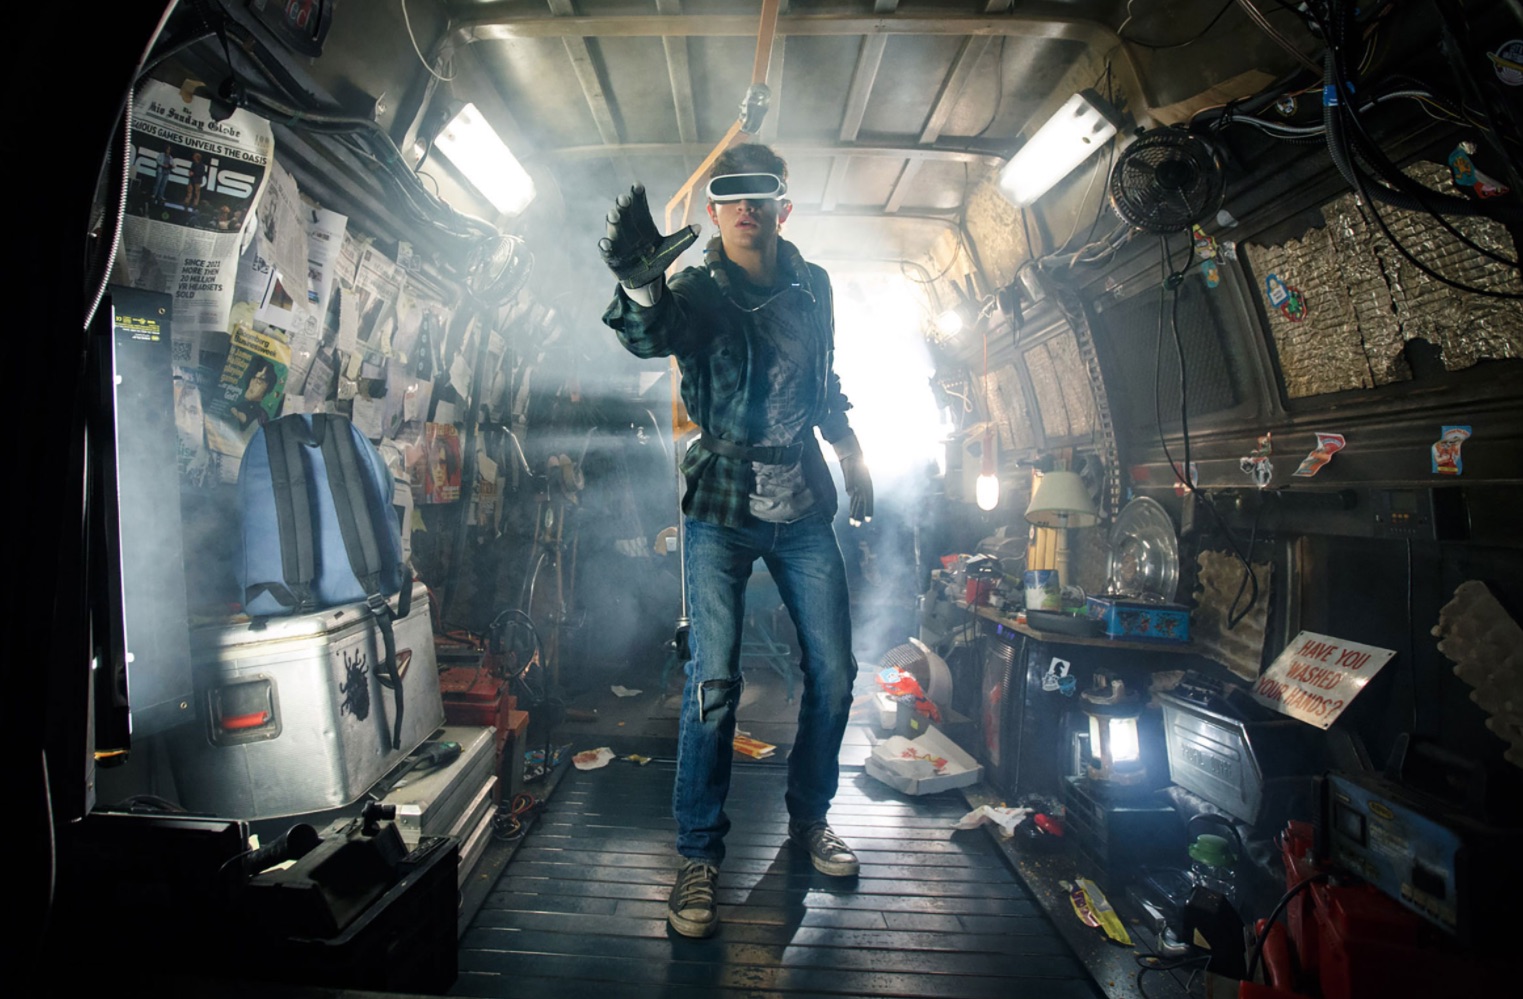 Box Office: Steven Spielberg's 'Ready Player One' Races Past $300M Global